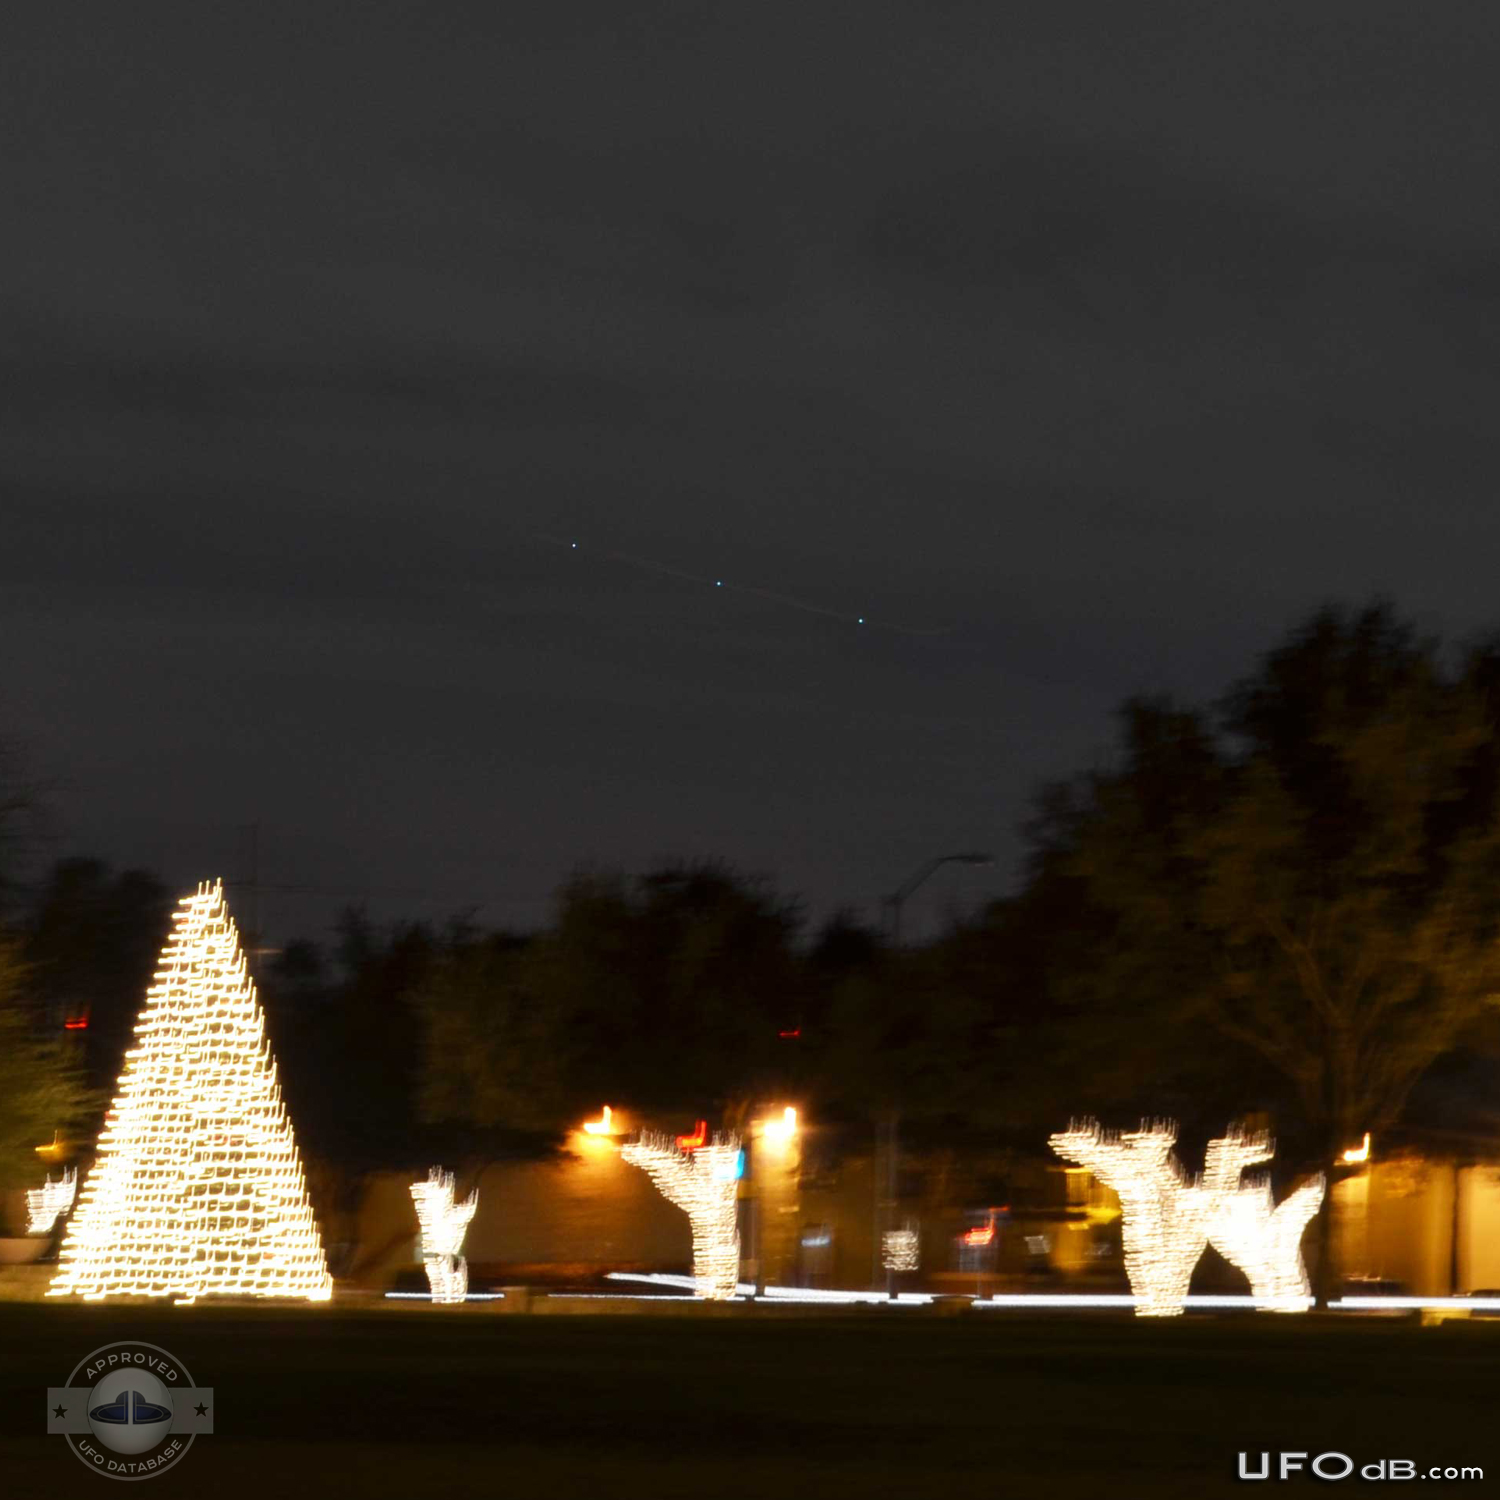 UFOs are showing on 2011 Christmas pictures - Dallas, Texas - 2011 UFO Picture #390-2